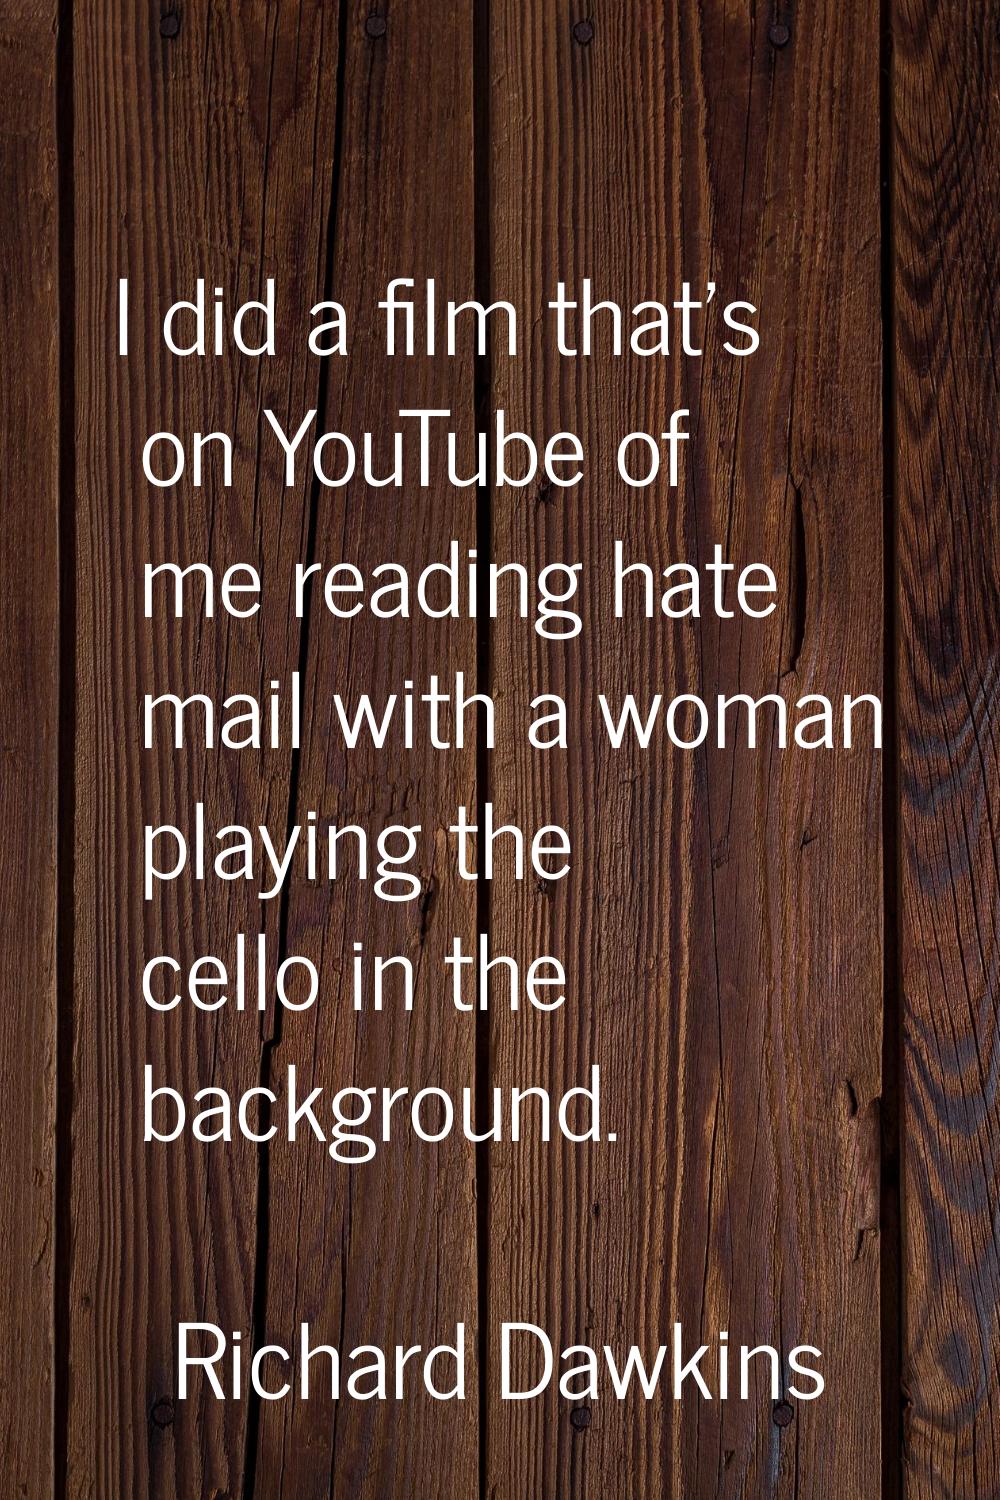 I did a film that's on YouTube of me reading hate mail with a woman playing the cello in the backgr